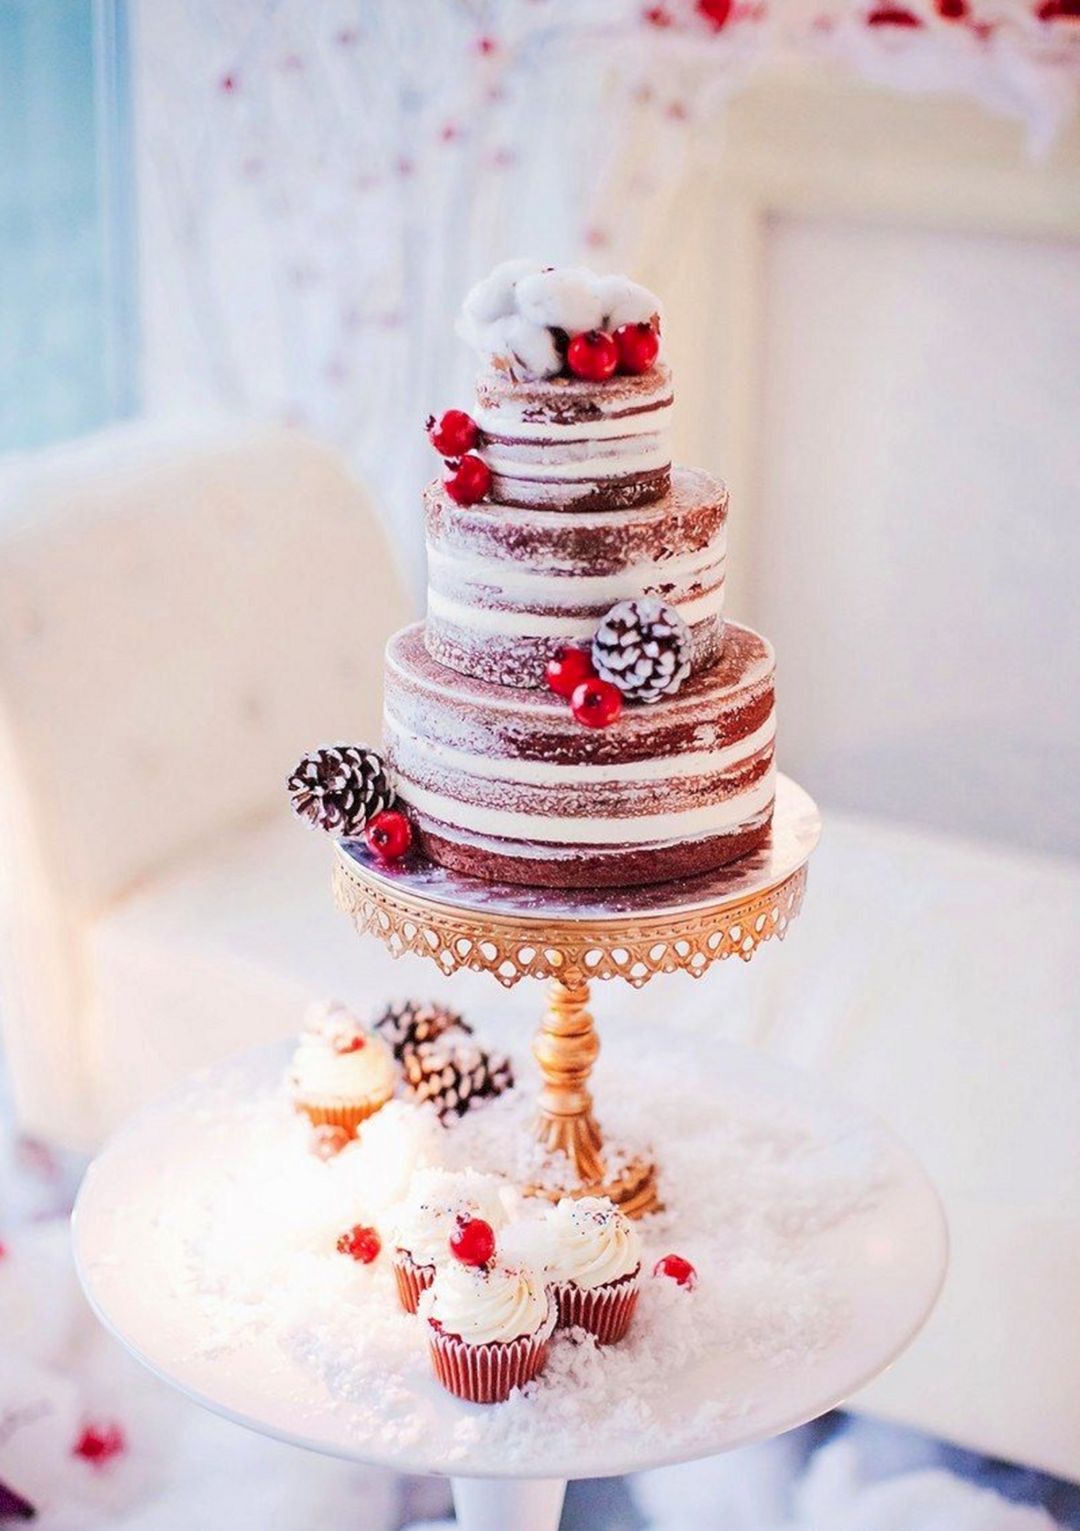 Romance weddeing cake in christmas from wedluxe